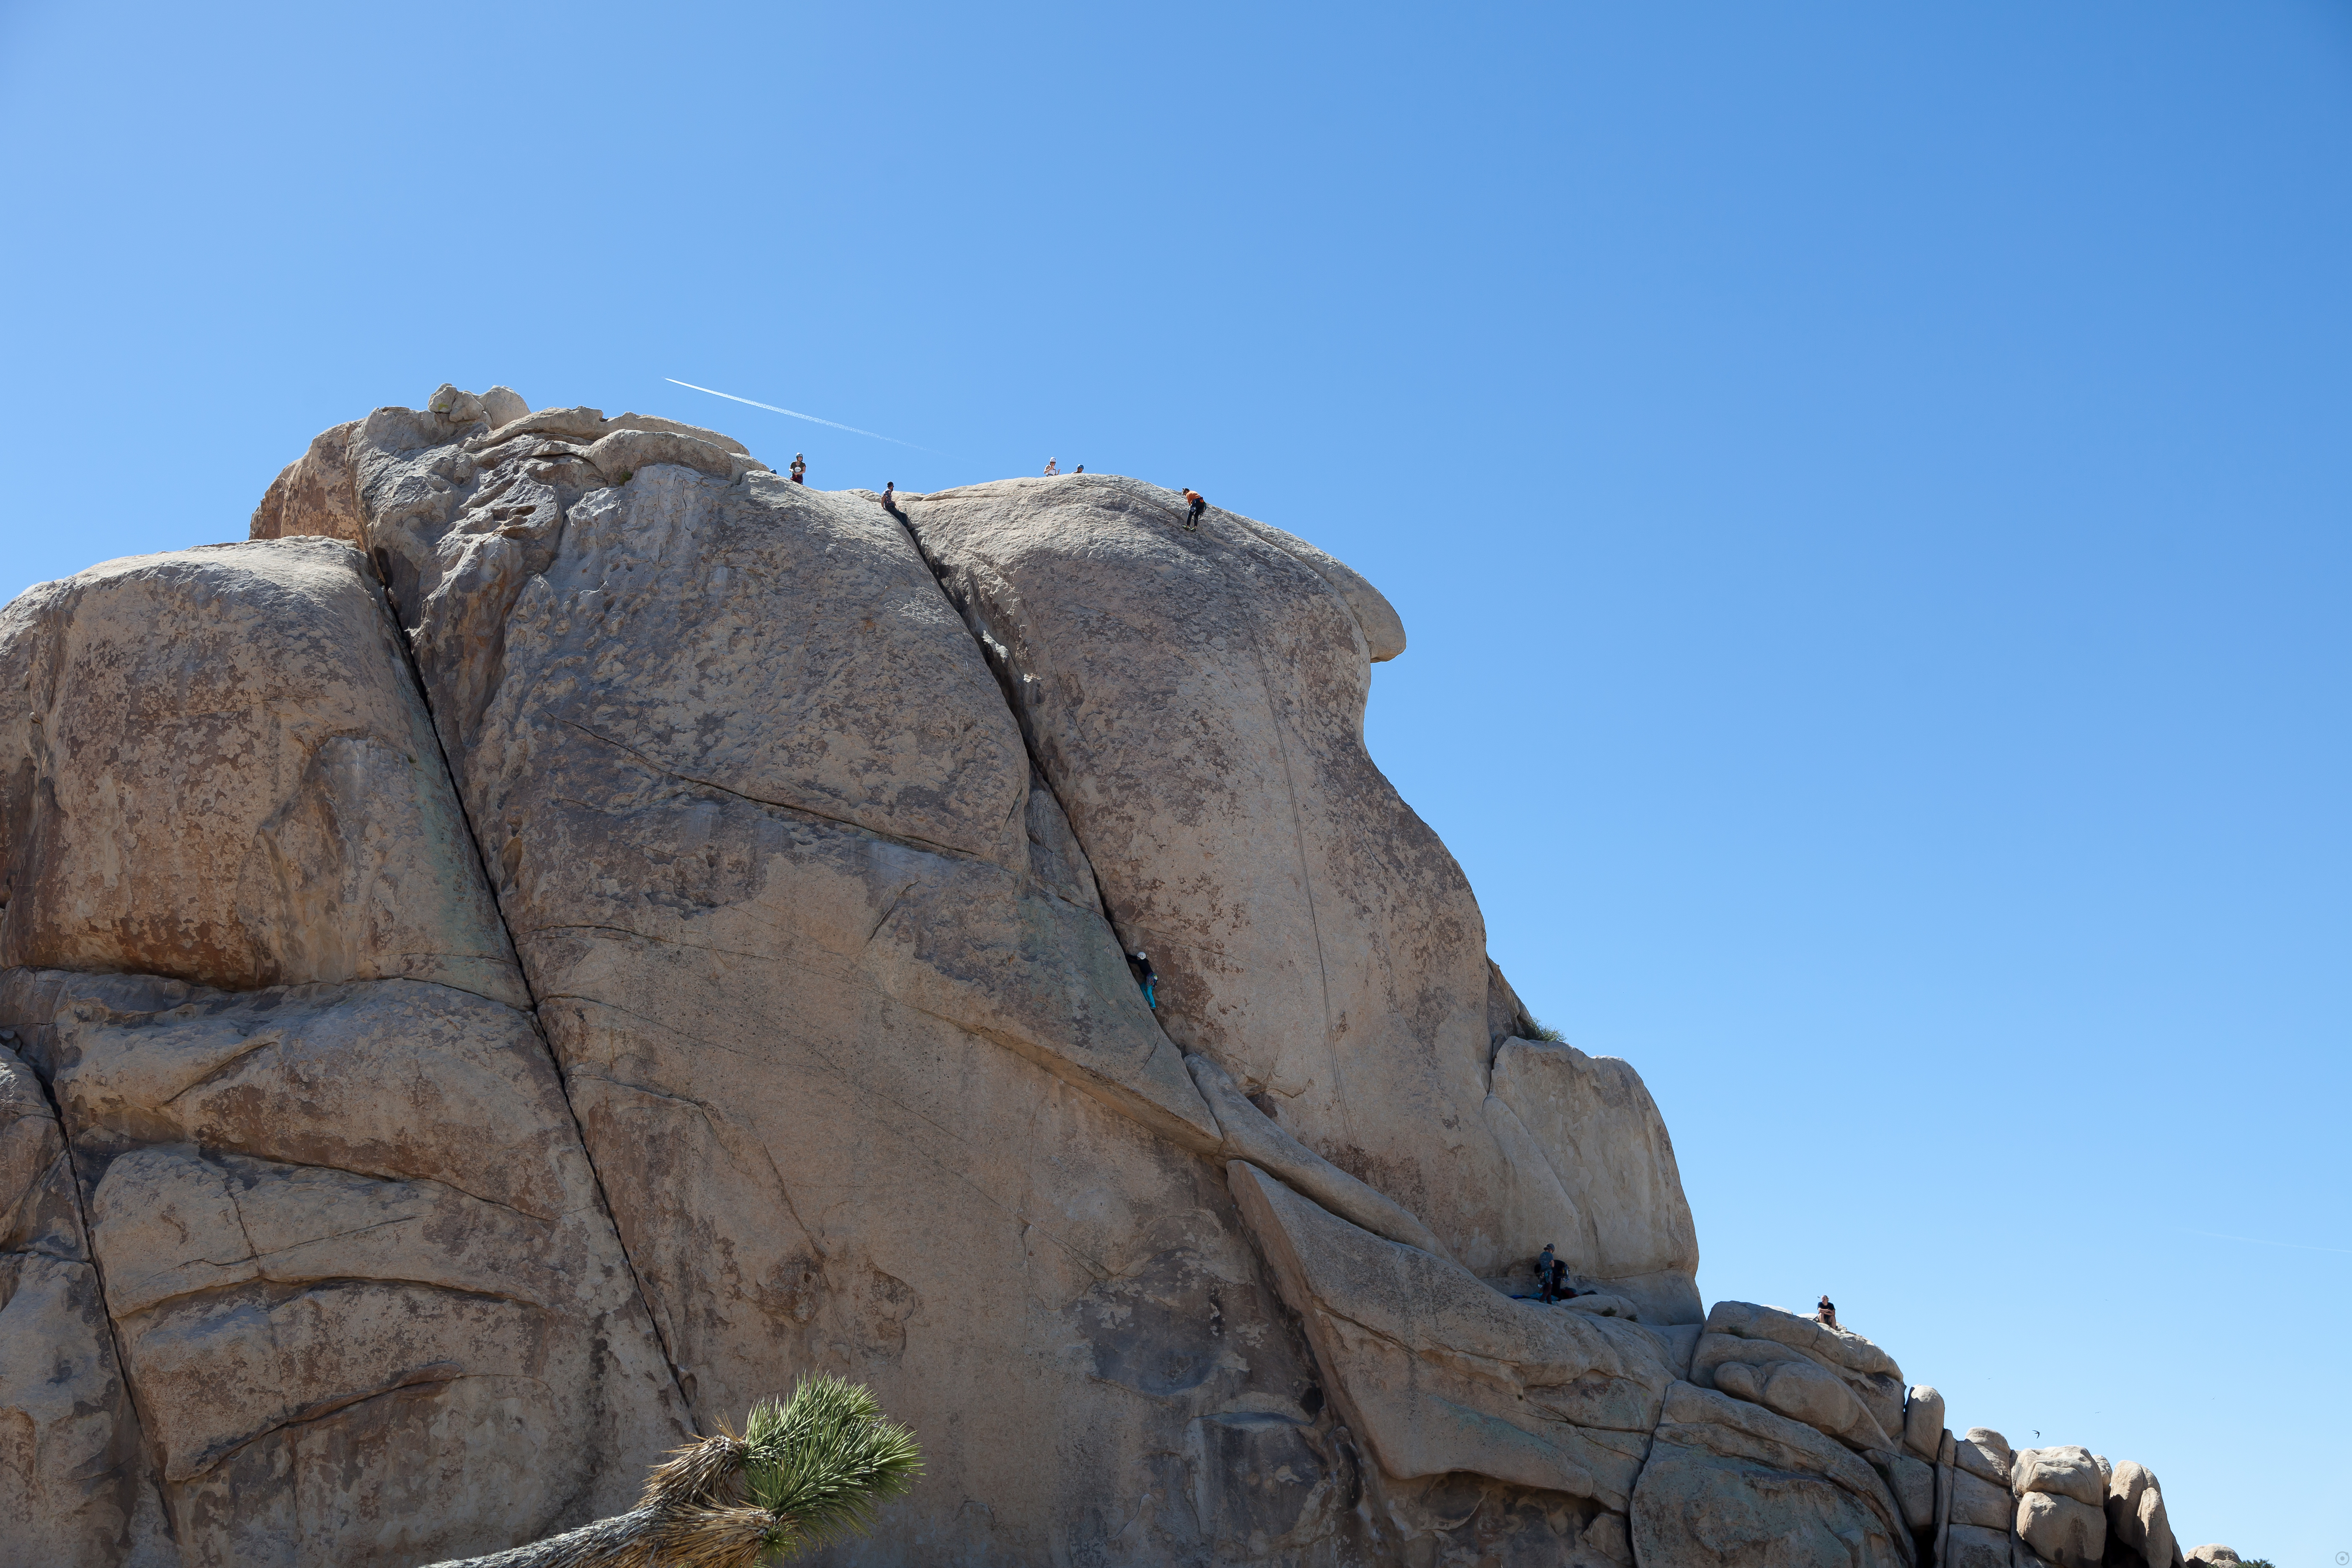 climbers at the top of Intersection Rock in Joshua Tree National Park